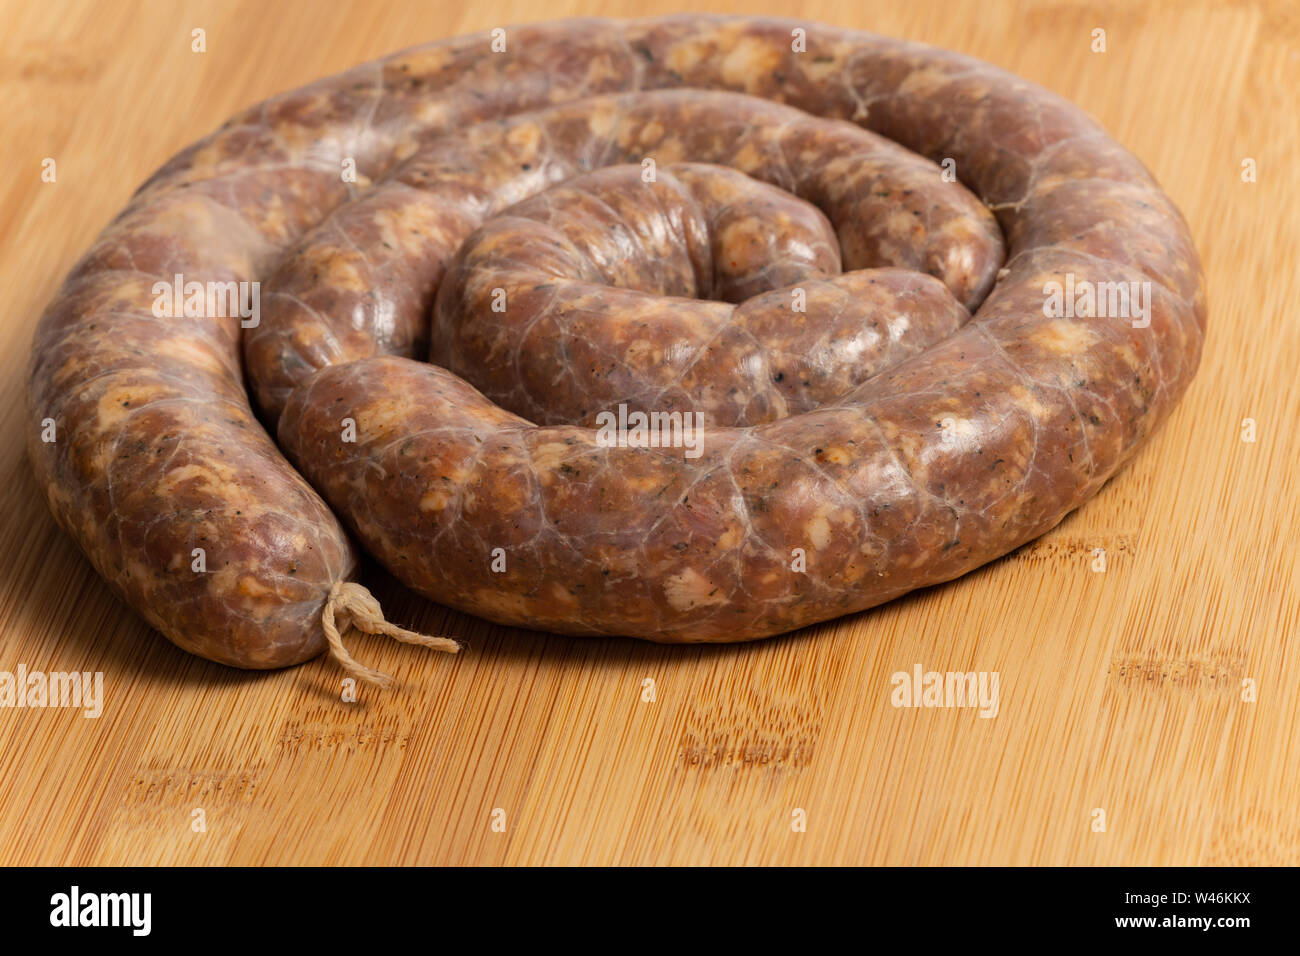 Raw homemade stuffed pork sausages isolated on a woodboard. Stock Photo